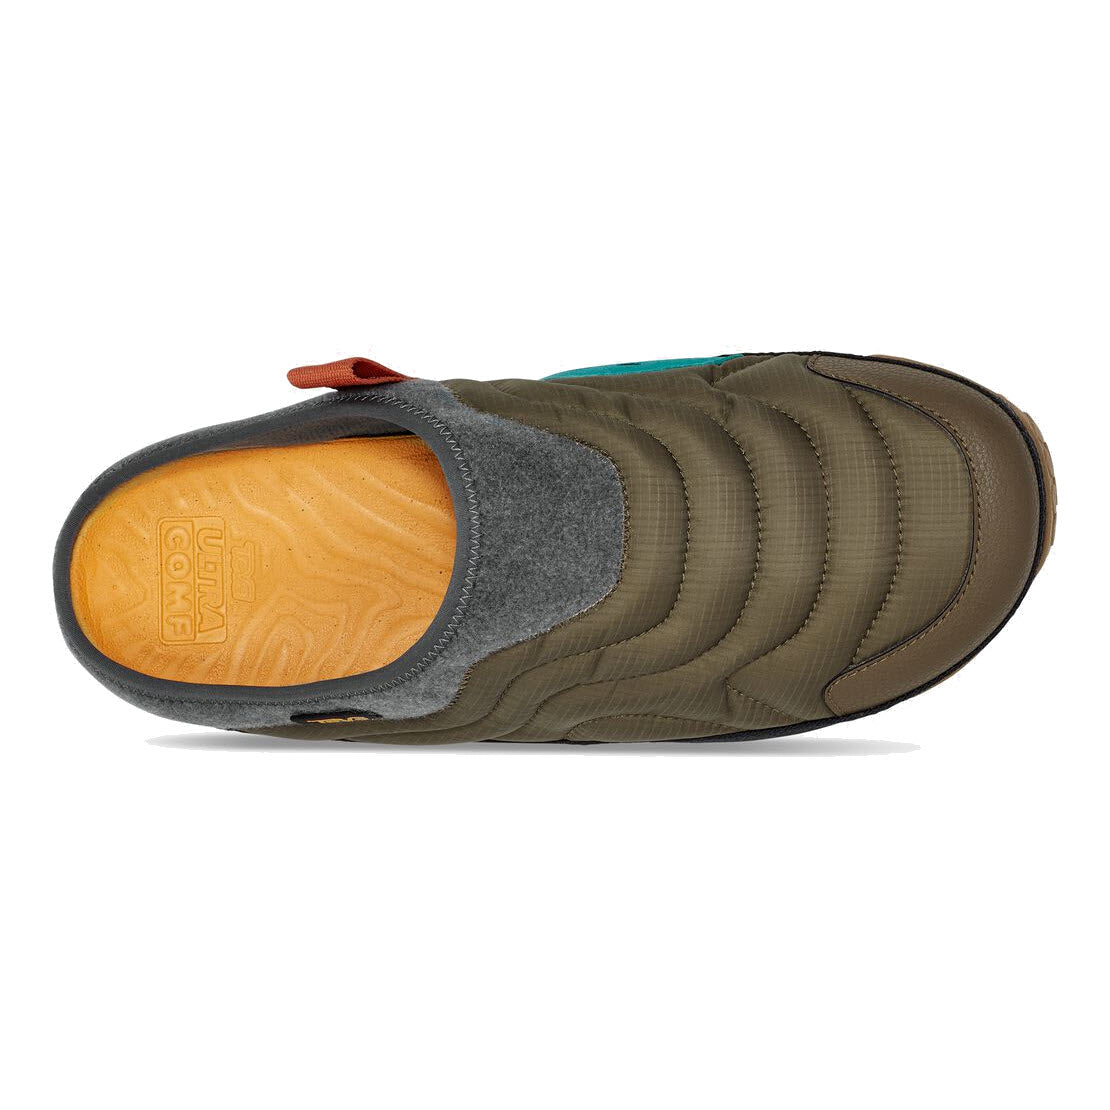 Slip-on shoe with quilted upper and contrasting sole displayed from a top-down view, featuring a Teva ULTRA-COMPF insole for added comfort.